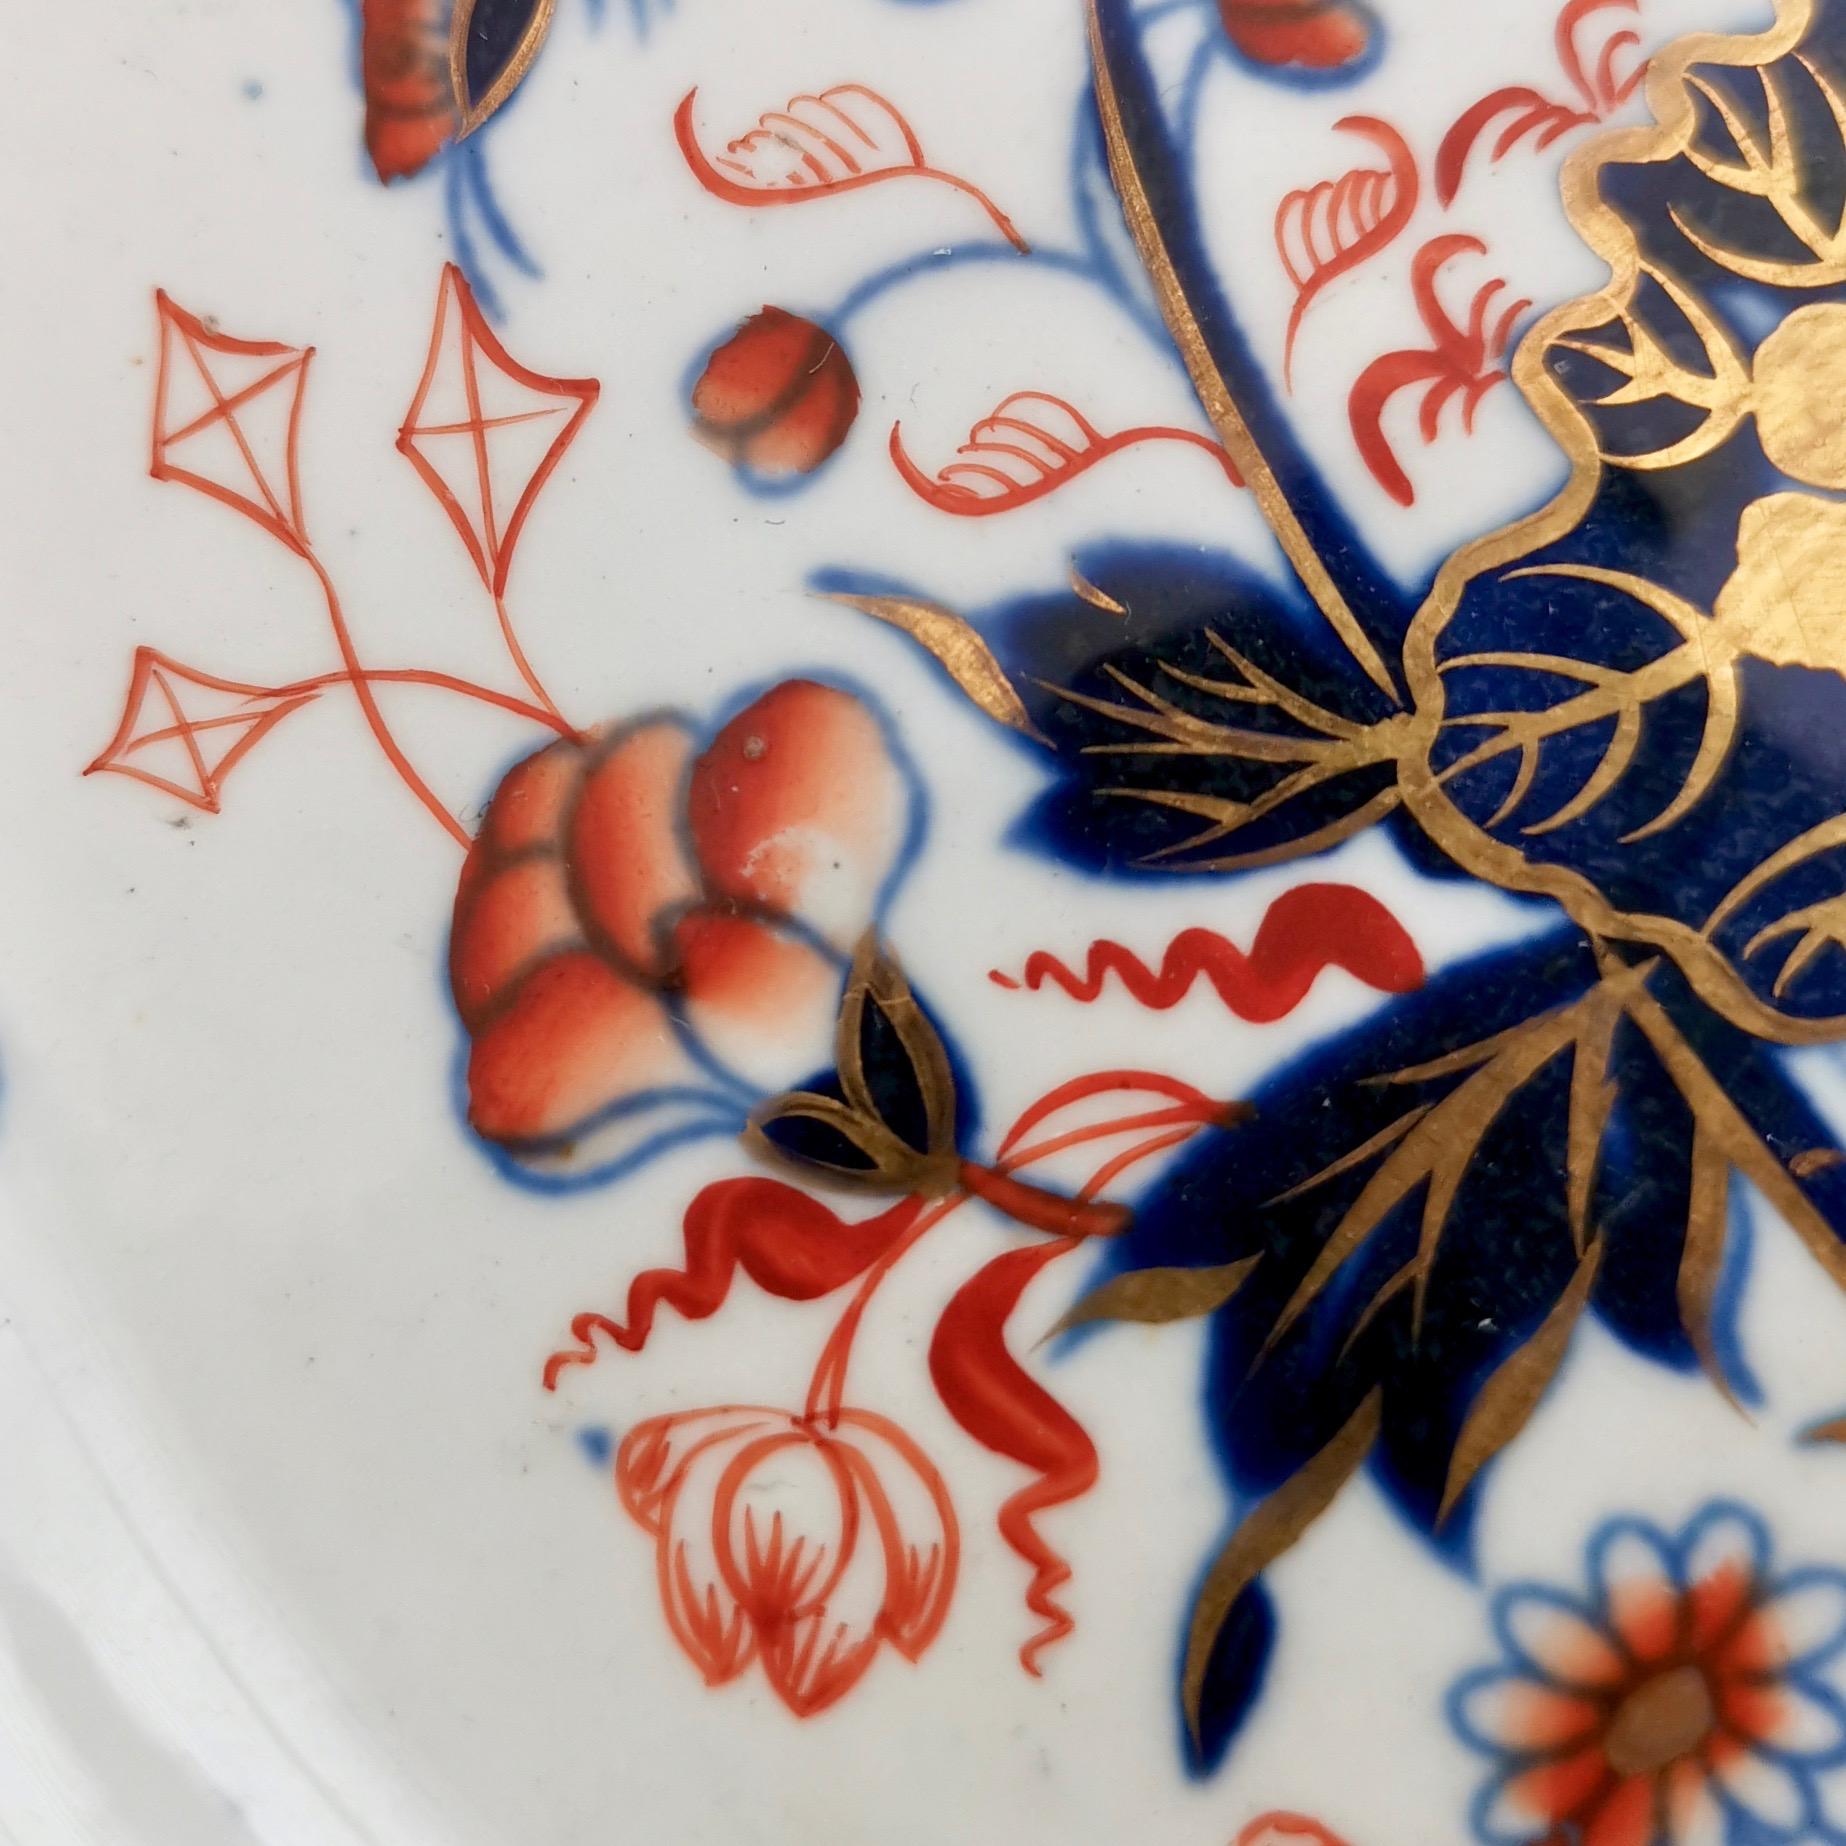 Early 19th Century Spode Plate, Bang Up Pattern Chinoiserie New Stone China, Regency 1822-1833